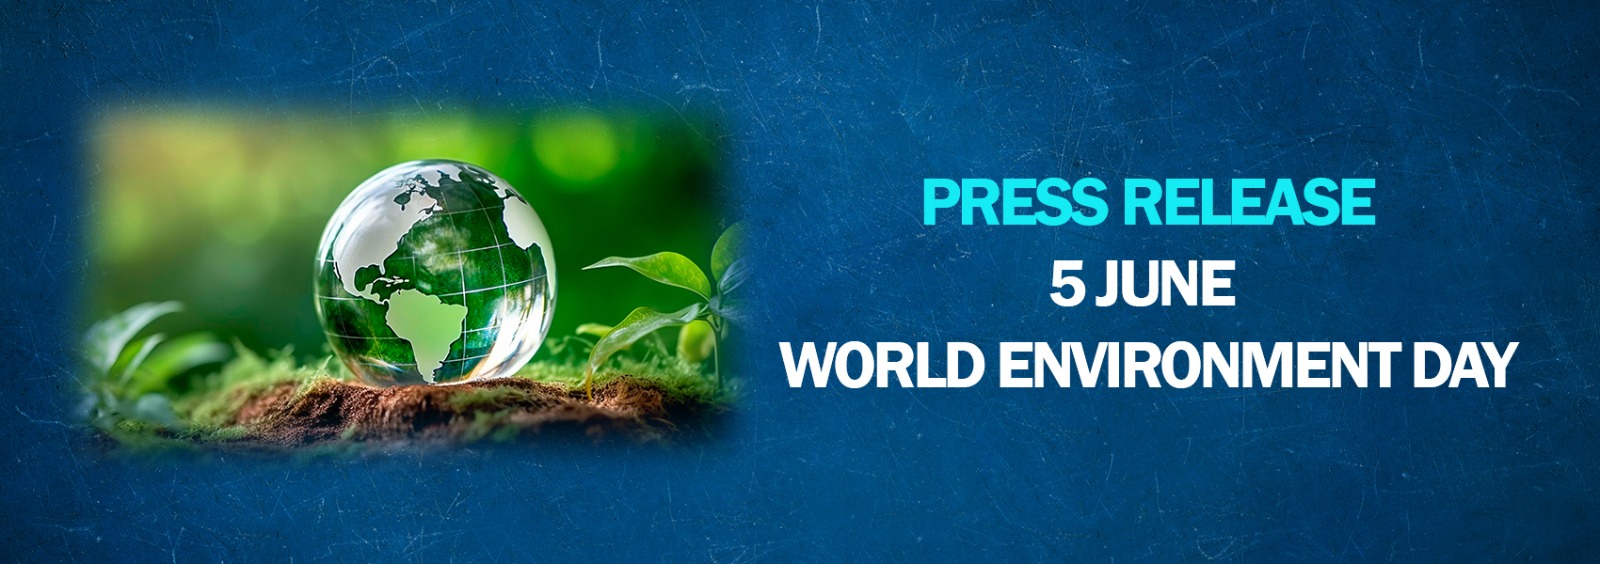 Press Release on 5 June World Environment Day